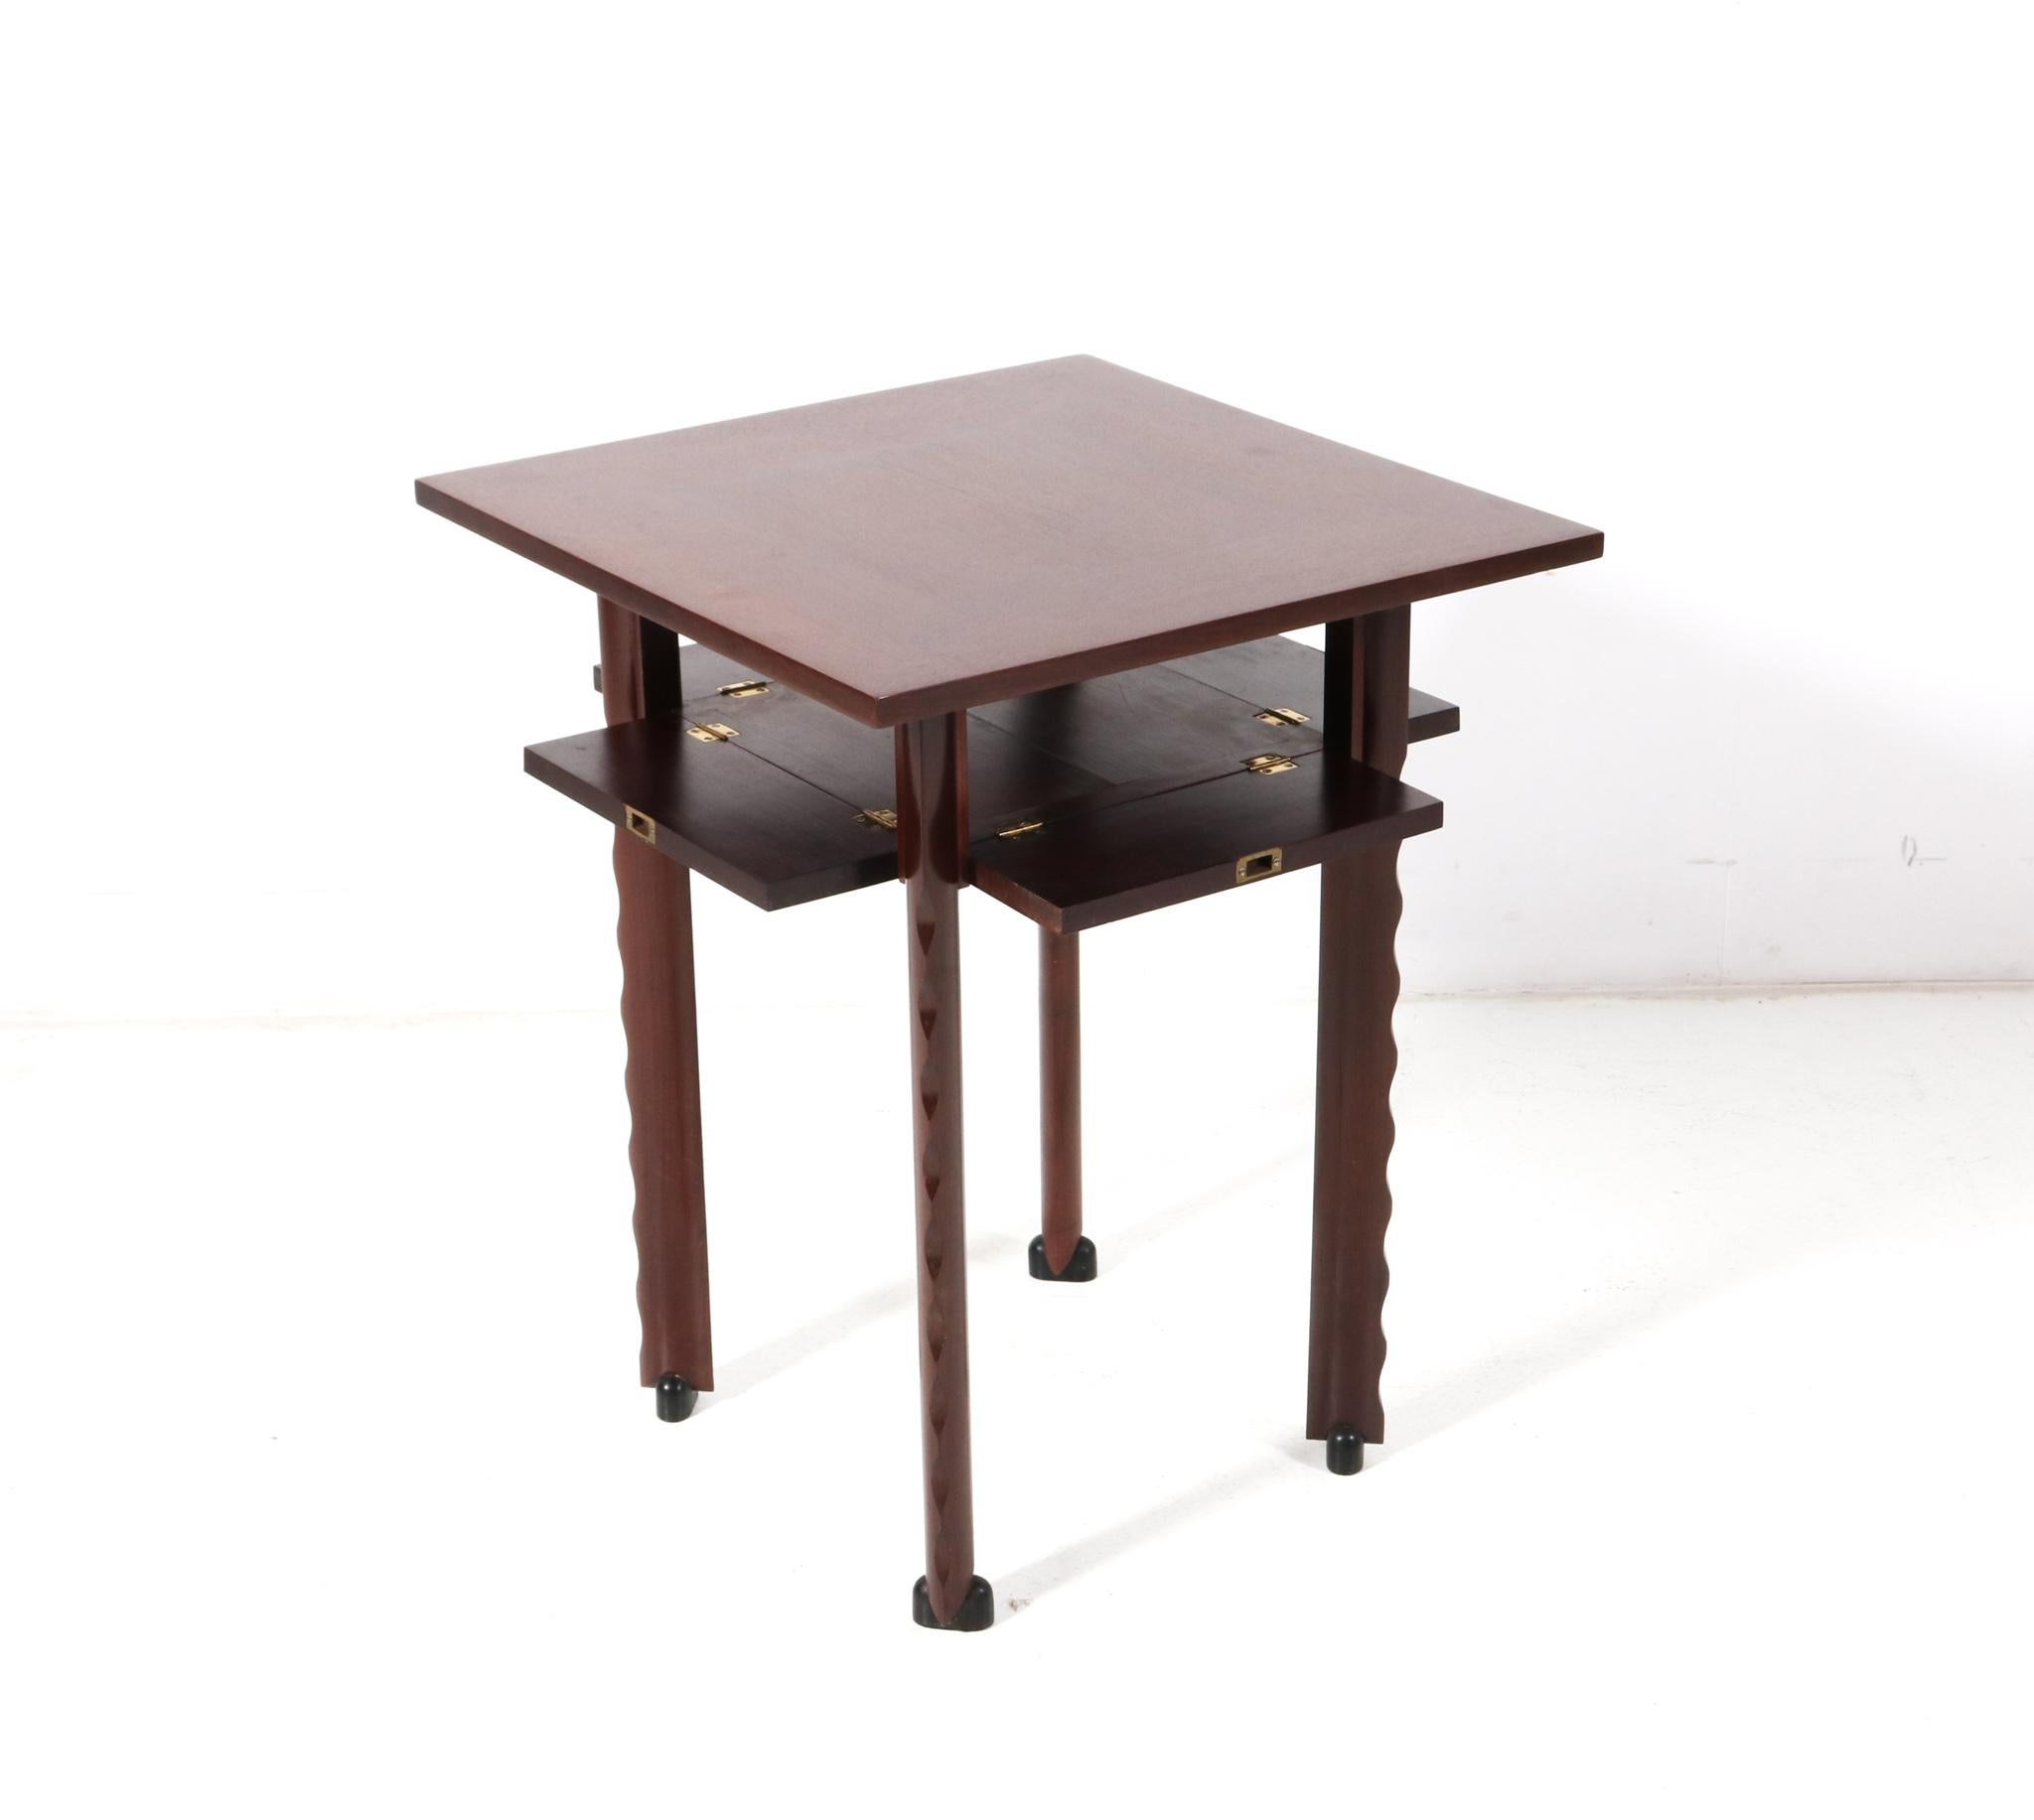 Walnut Art Deco Amsterdamse School Game Table by C.H. Eckhart, 1920s For Sale 2